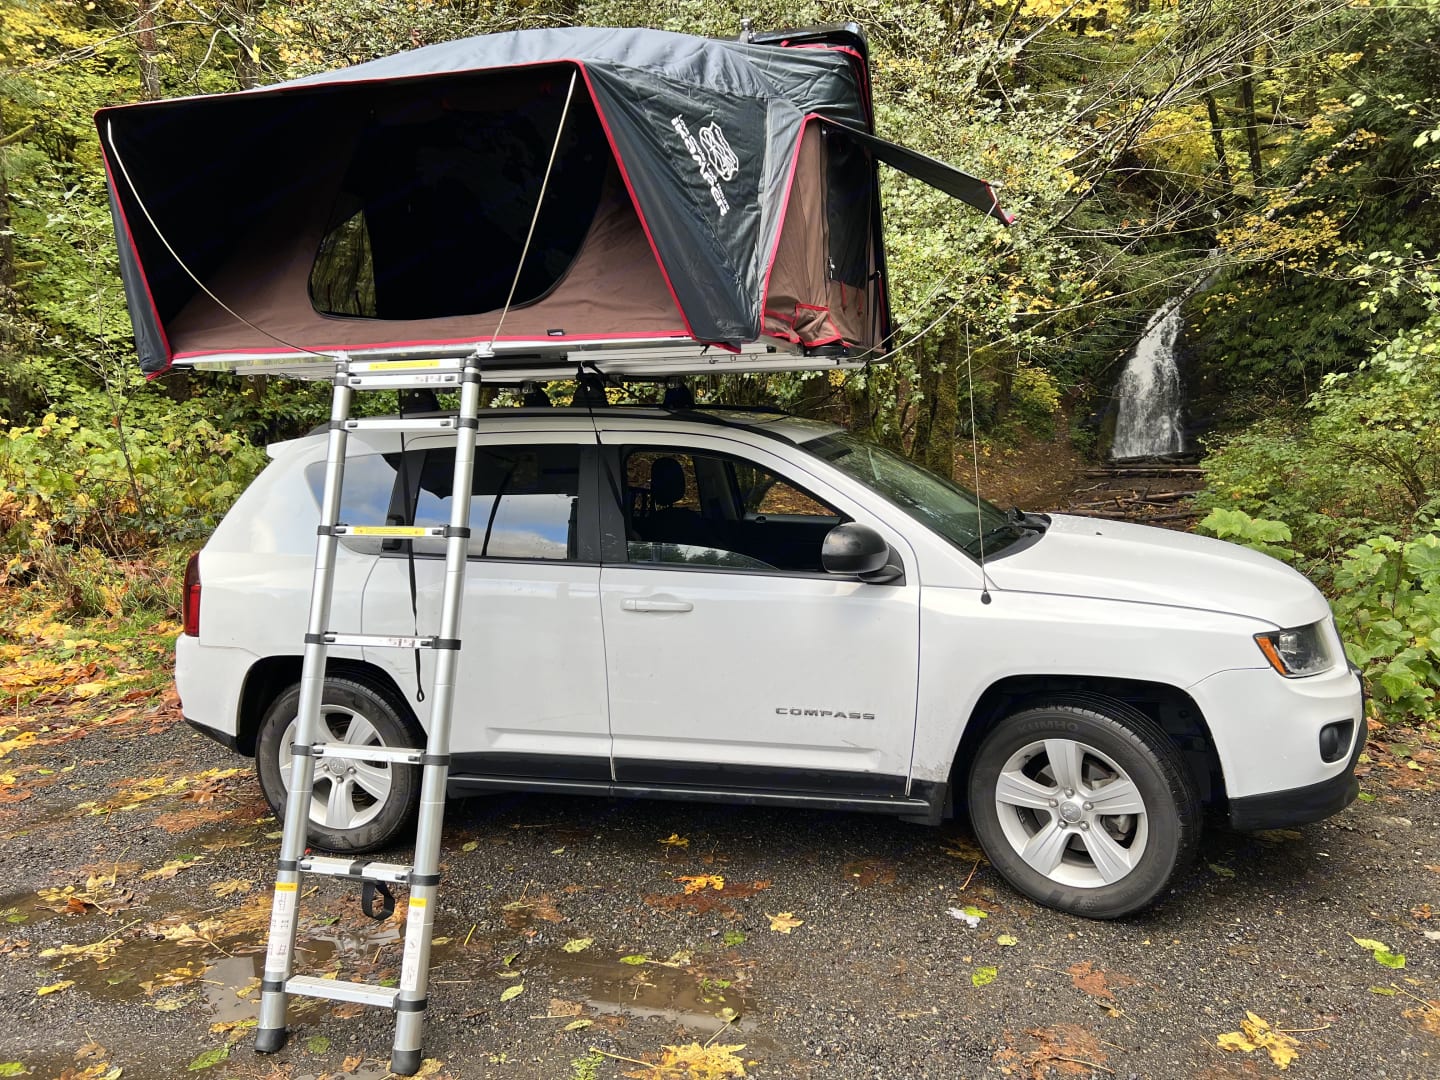 Jeep Compass roof tent for rent